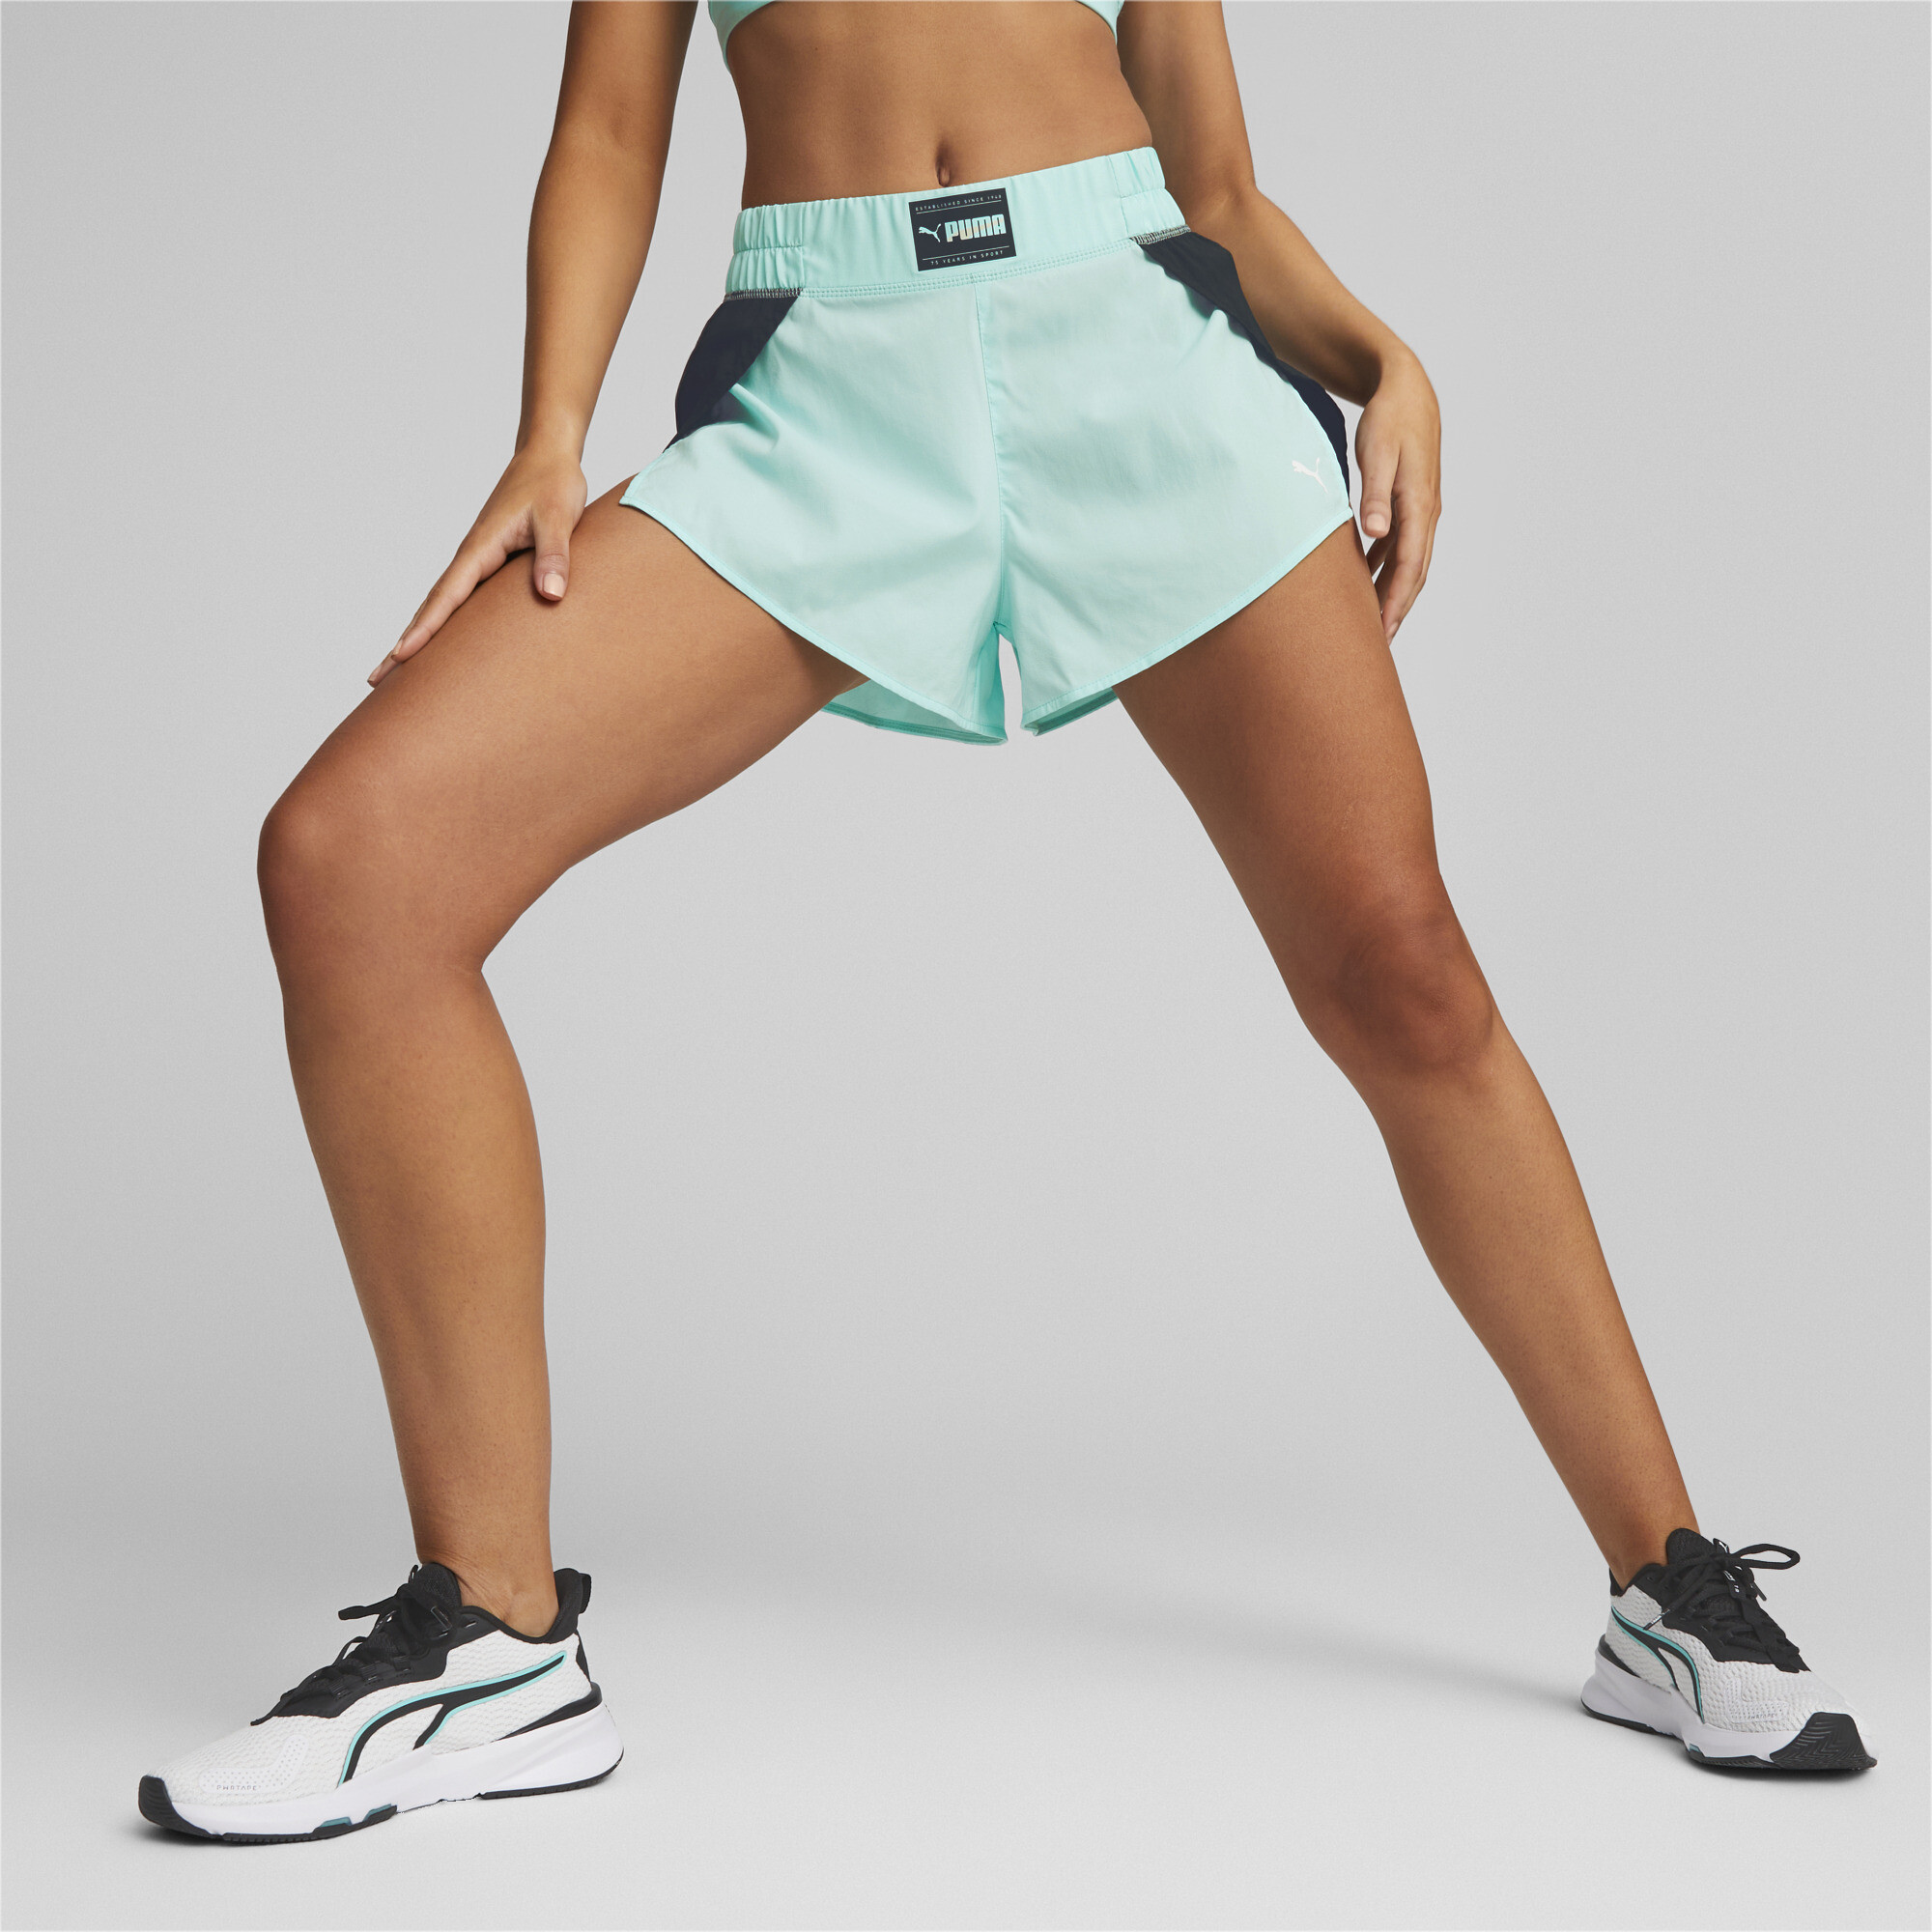 M Deportes - Ropa Deportiva Mujer - Shorts Deportivos Mujer – Oechsle